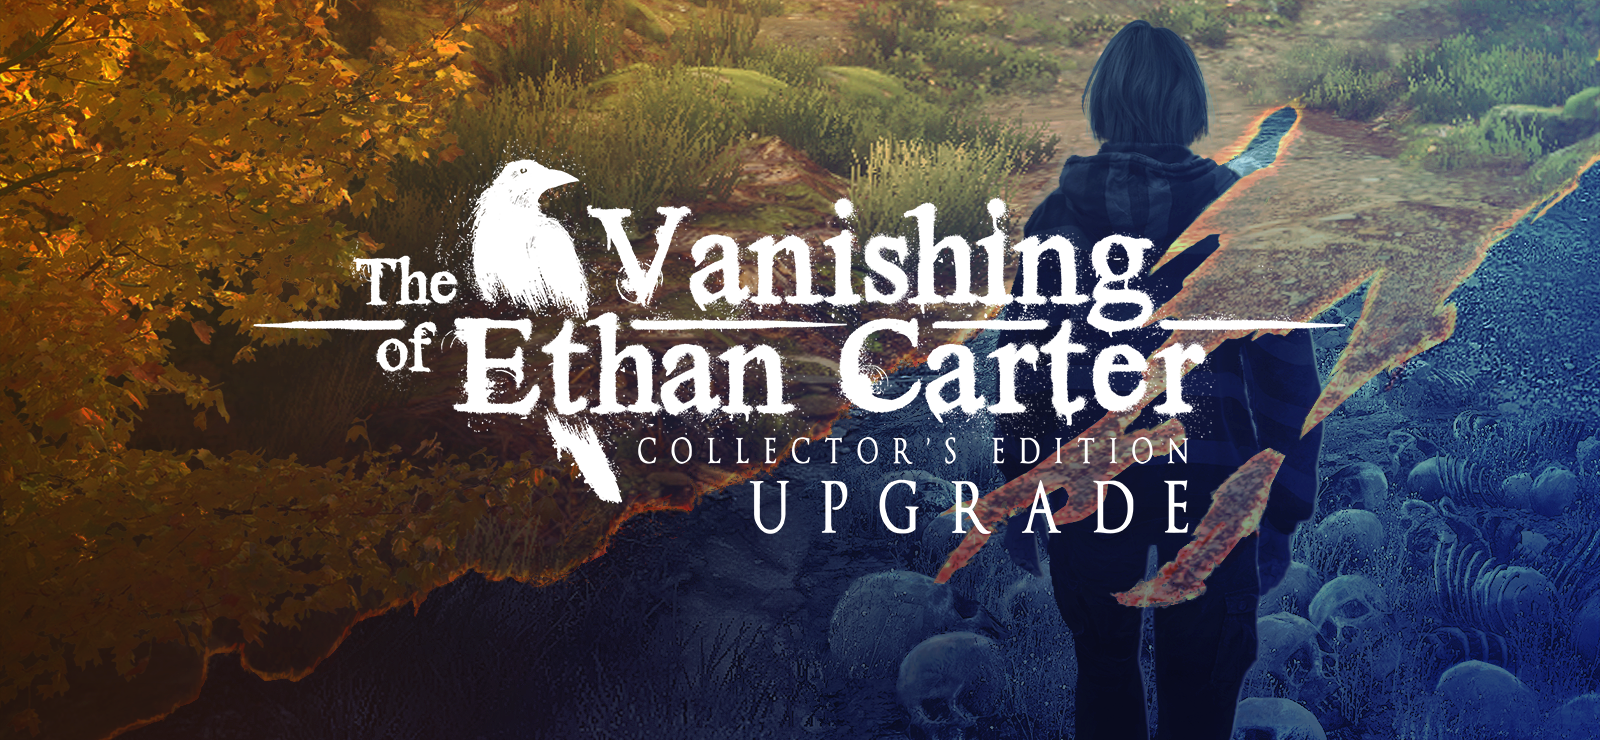 The Vanishing Of Ethan Carter - Collector's Edition Upgrade